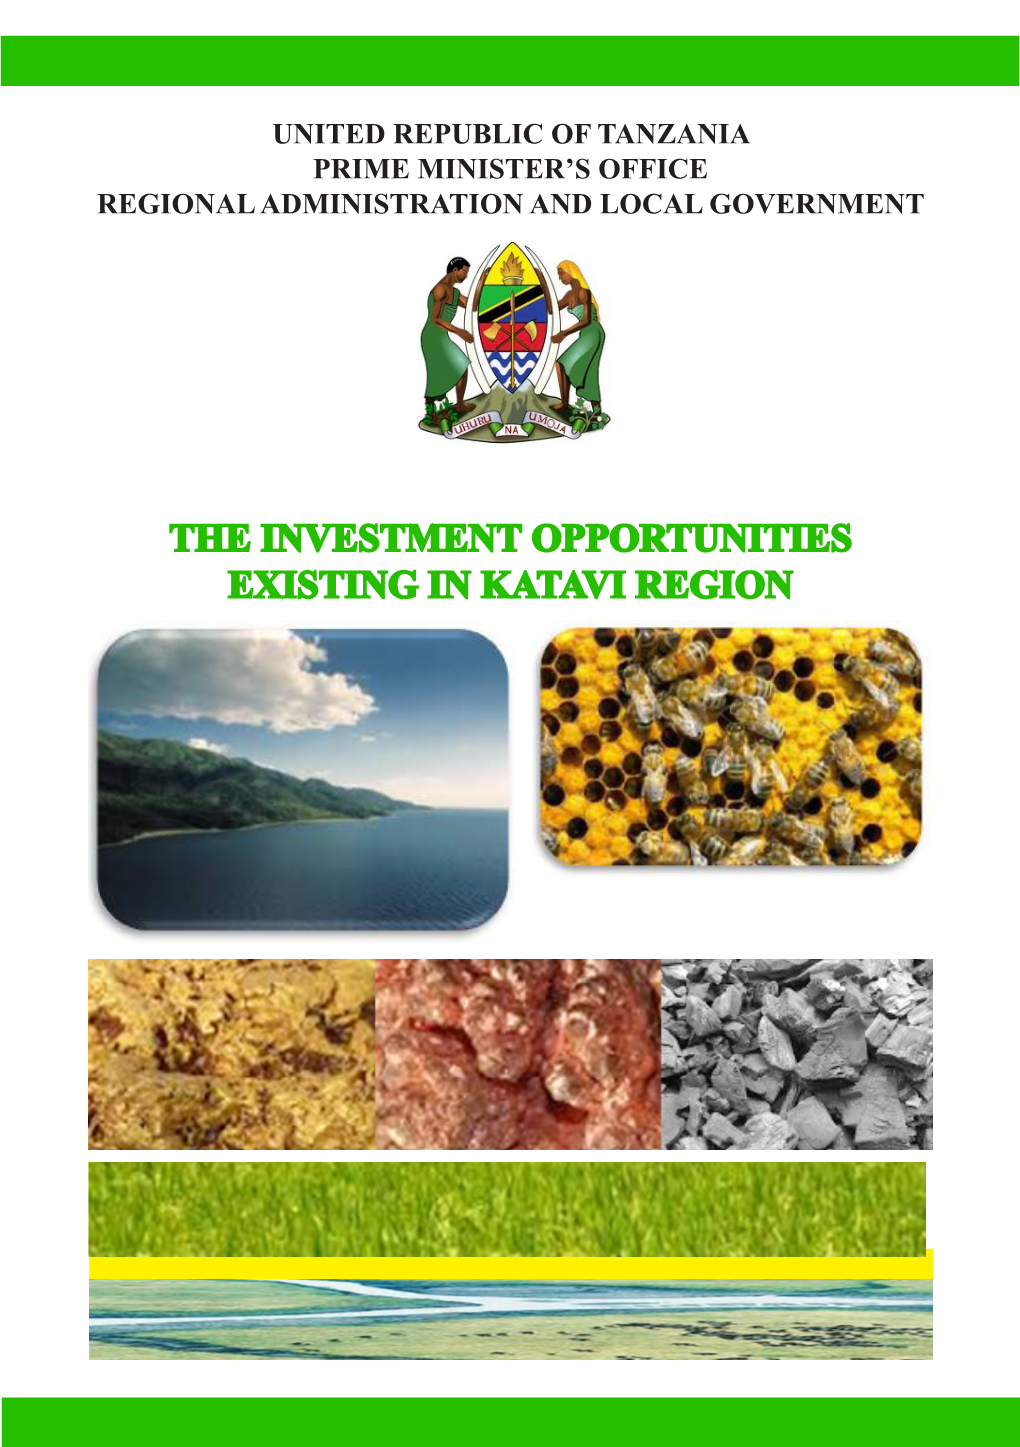 The Investment Opportunities Existing in Katavi Region